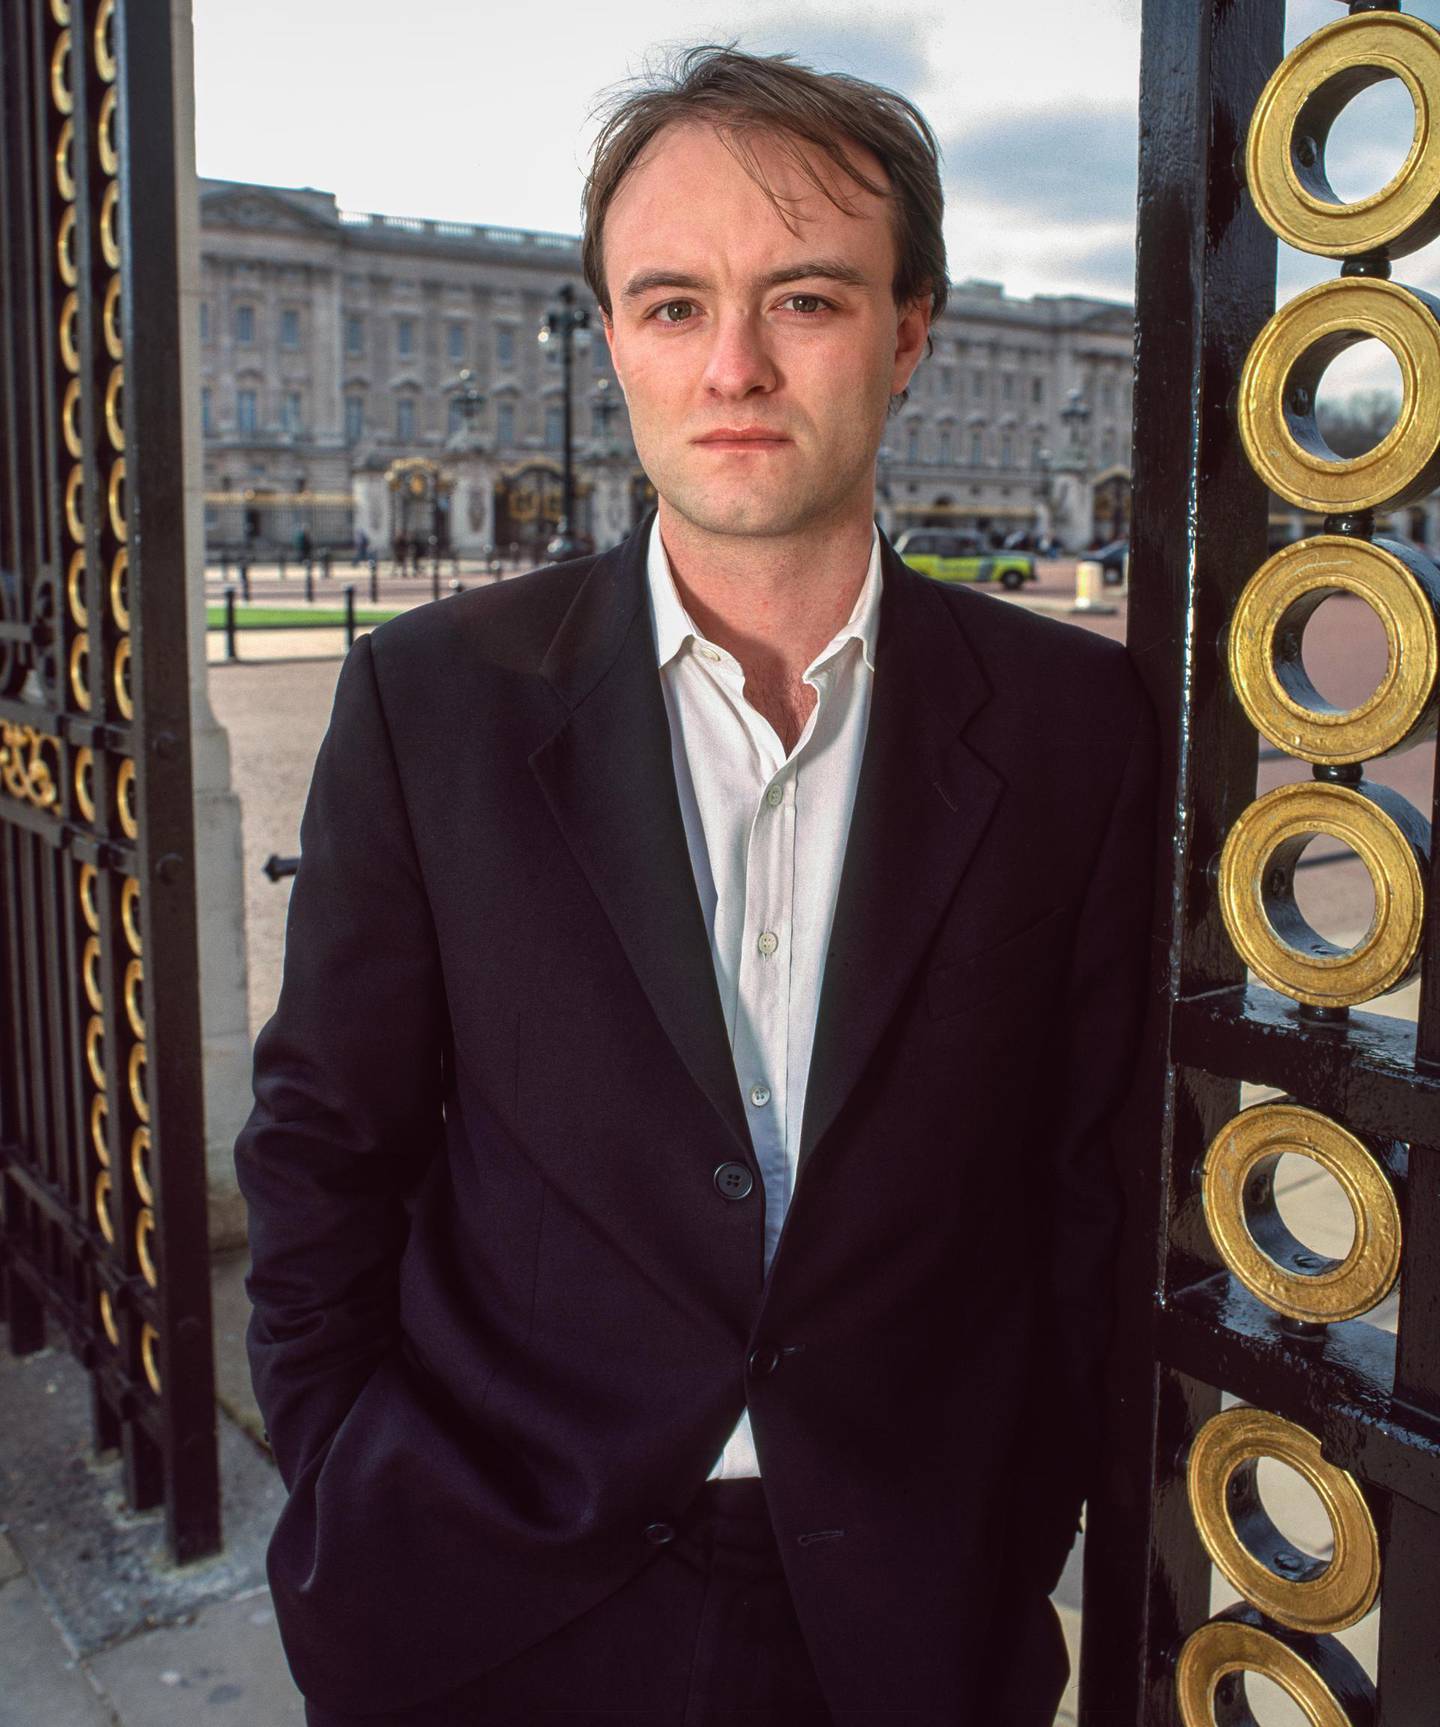 LONDON, ENGLAND - MARCH 19: Dominic Cummings, former adviser to the Education Secretary Michael Gove, poses for a photograph when he was campaign director at Business for Sterling, on March 19, 2001, in London, England. (Photo by David Levenson/Getty Images)